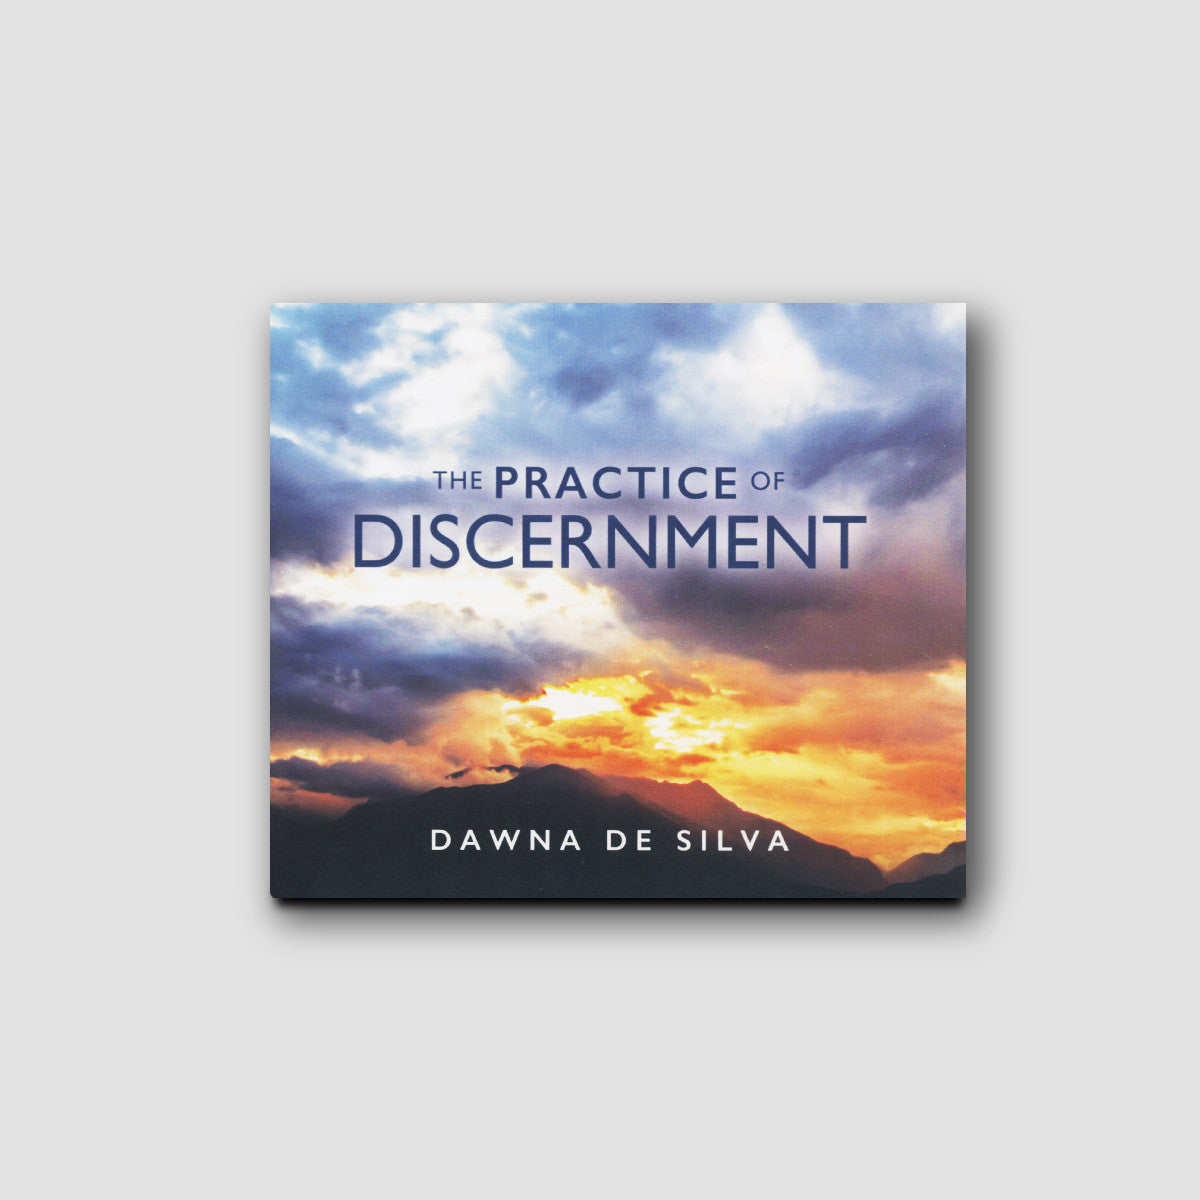 The Practice of Discernment